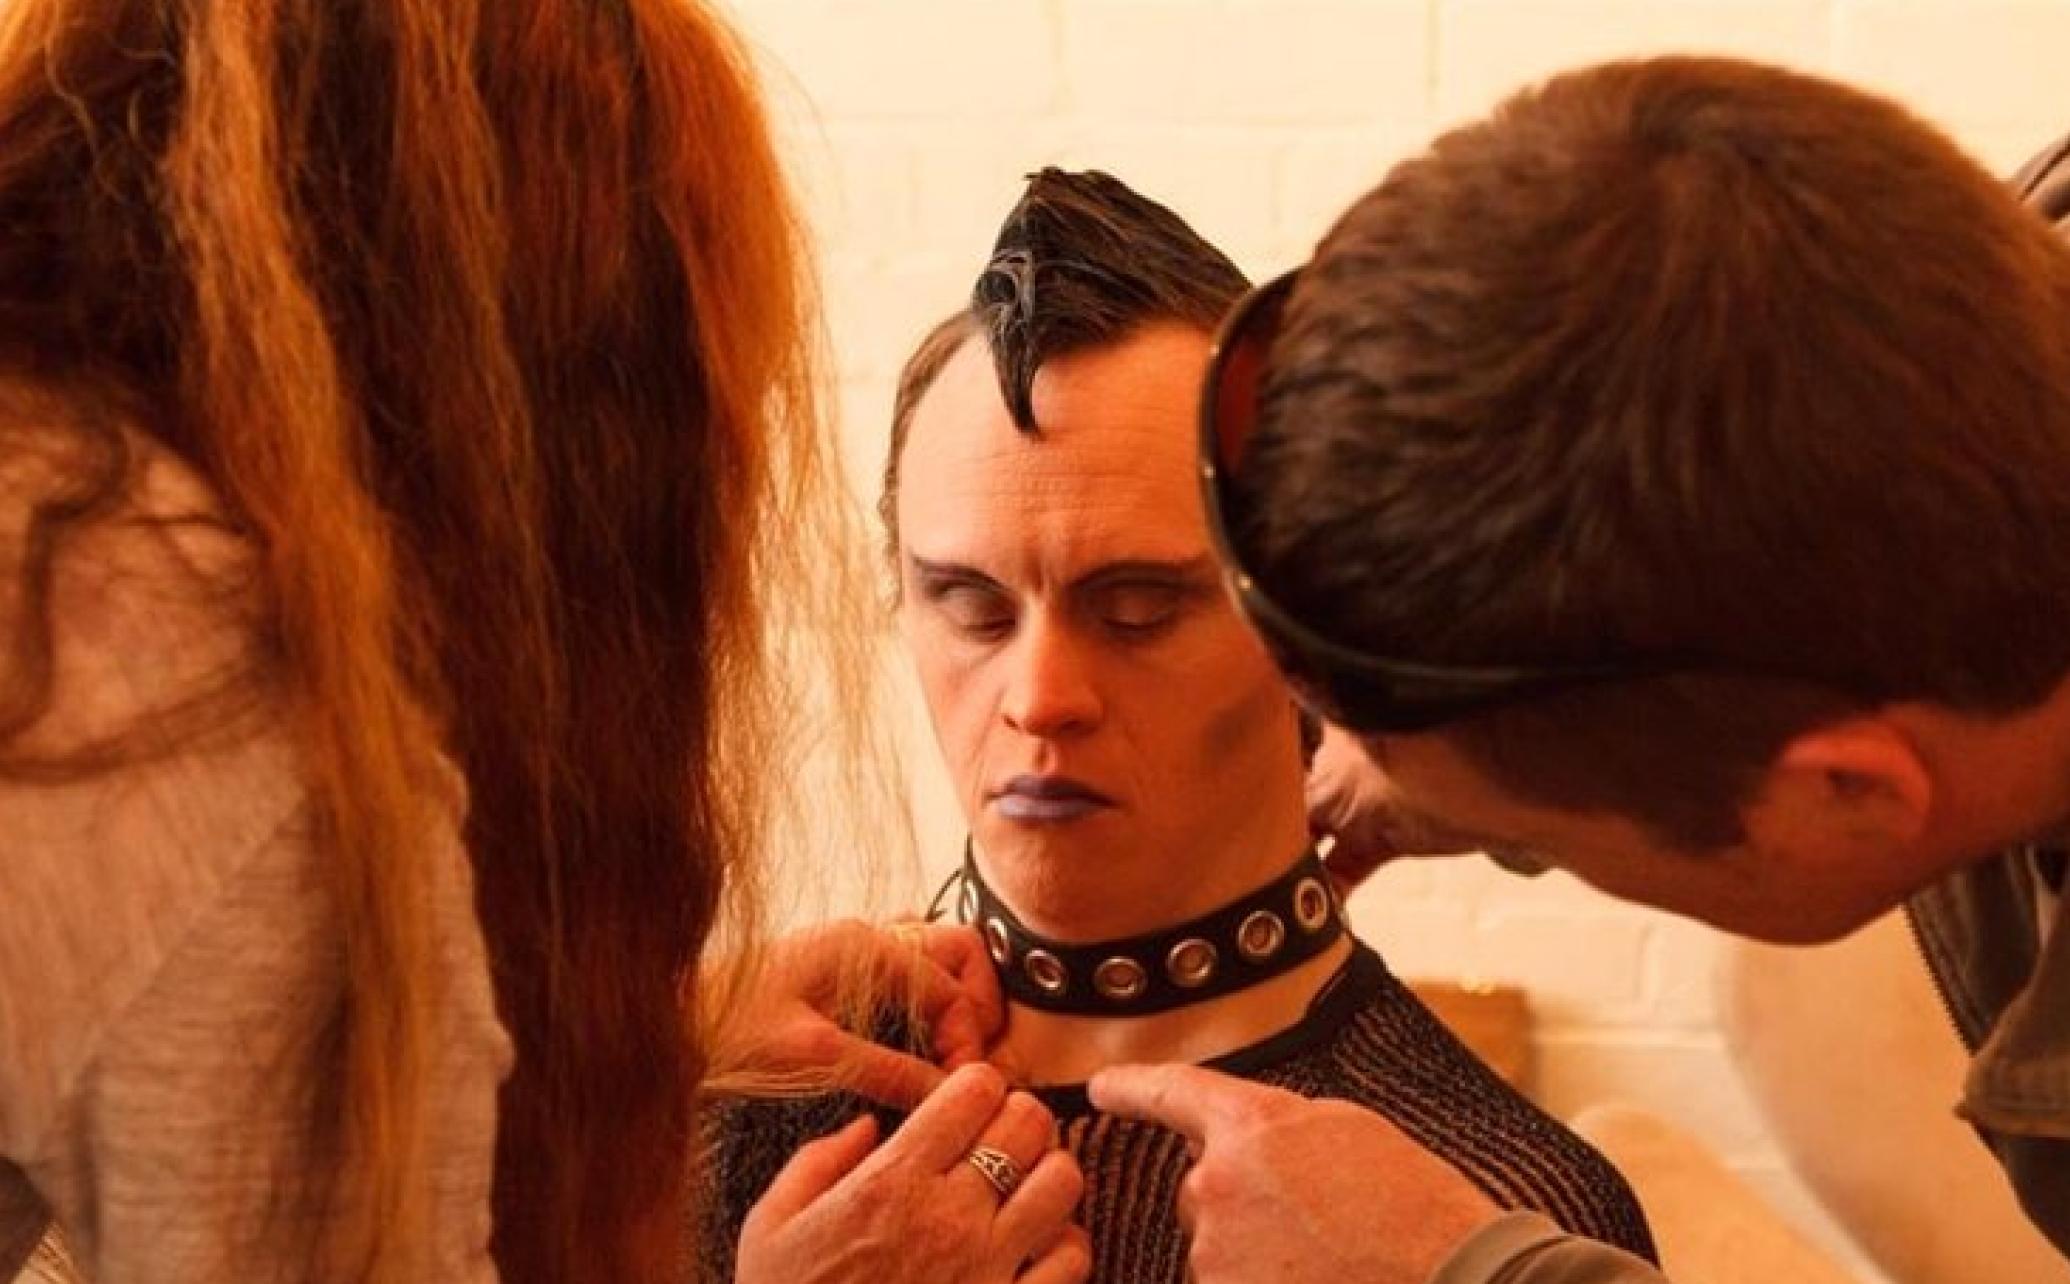 A Pākehā (Duncan) is sitting with two people in front of him fixing the front of his. top. He is wearing a collar, with purple lipstick on and his hair gelled forward into a spike.